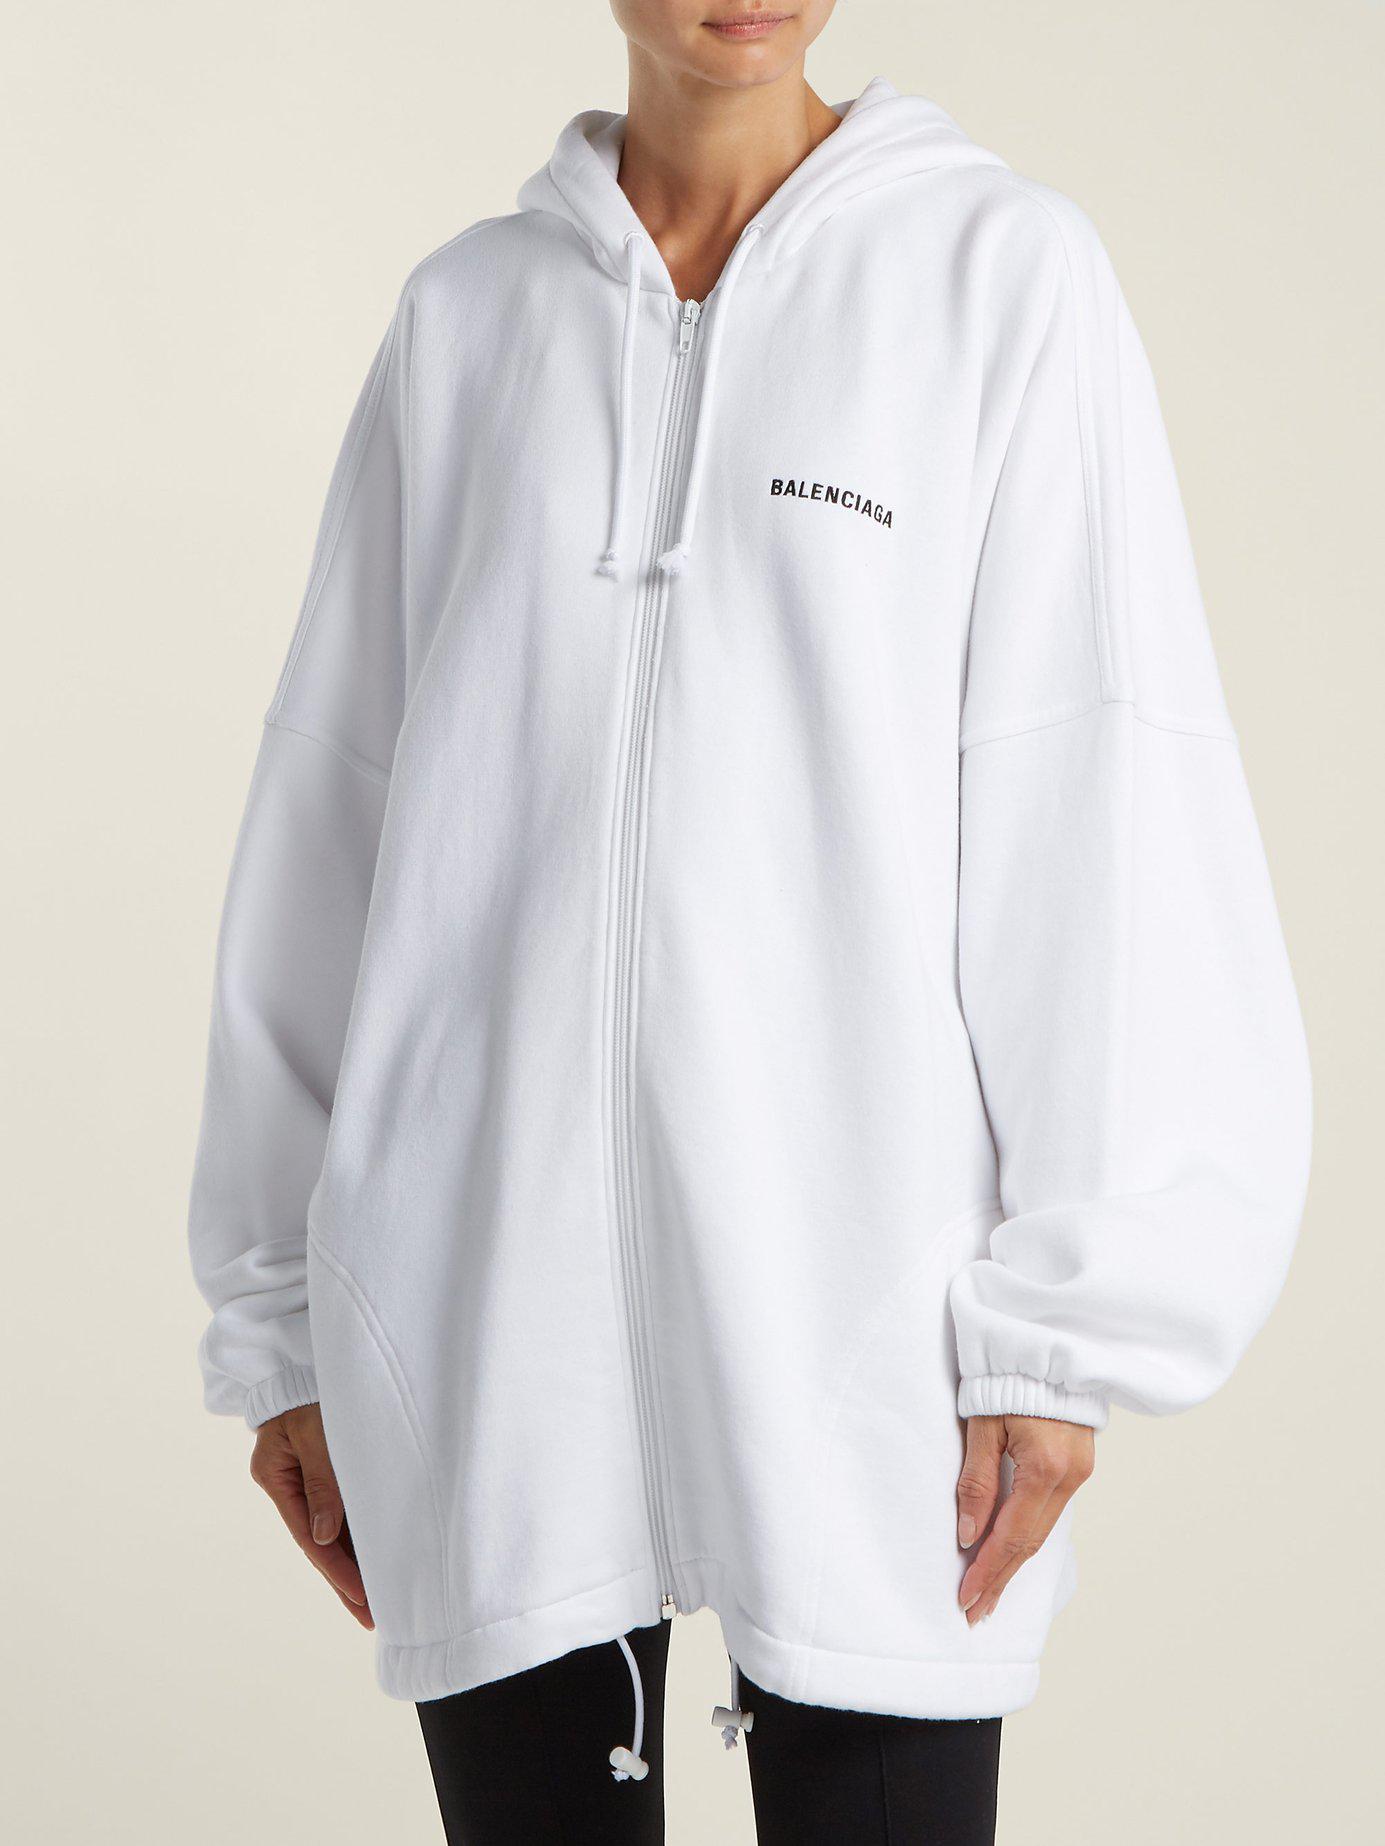 Balenciaga Oversized Logo Embroidered Cotton Hoodie in White - Lyst